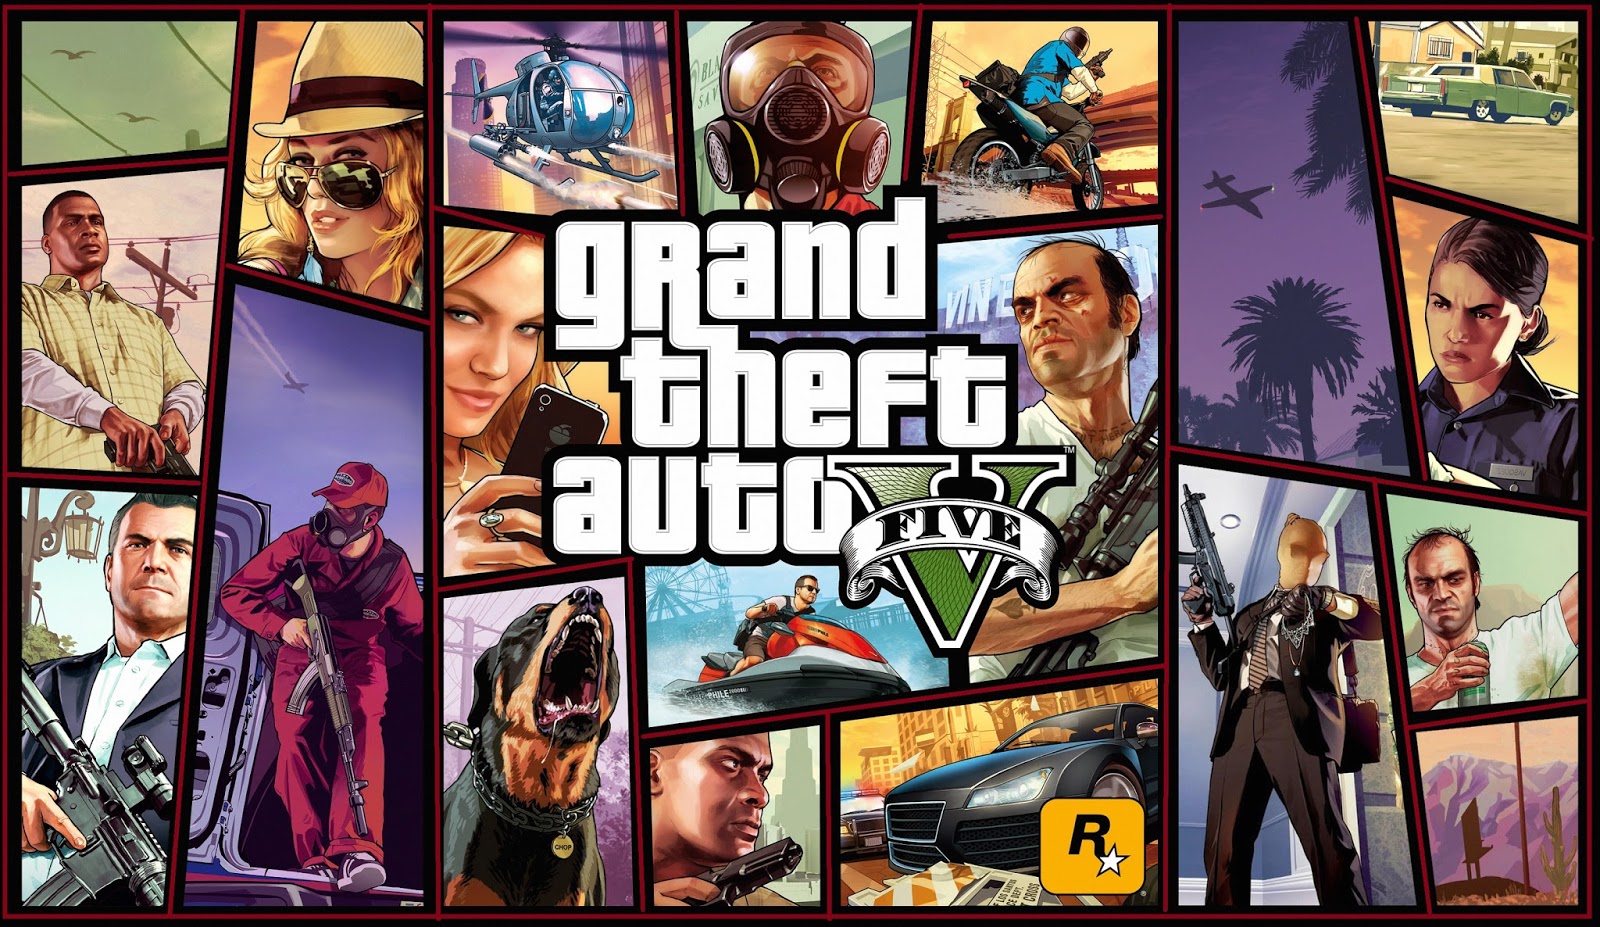 GTA V PC Full Game 2015 Free Download Direct Link [Compressed ISO]